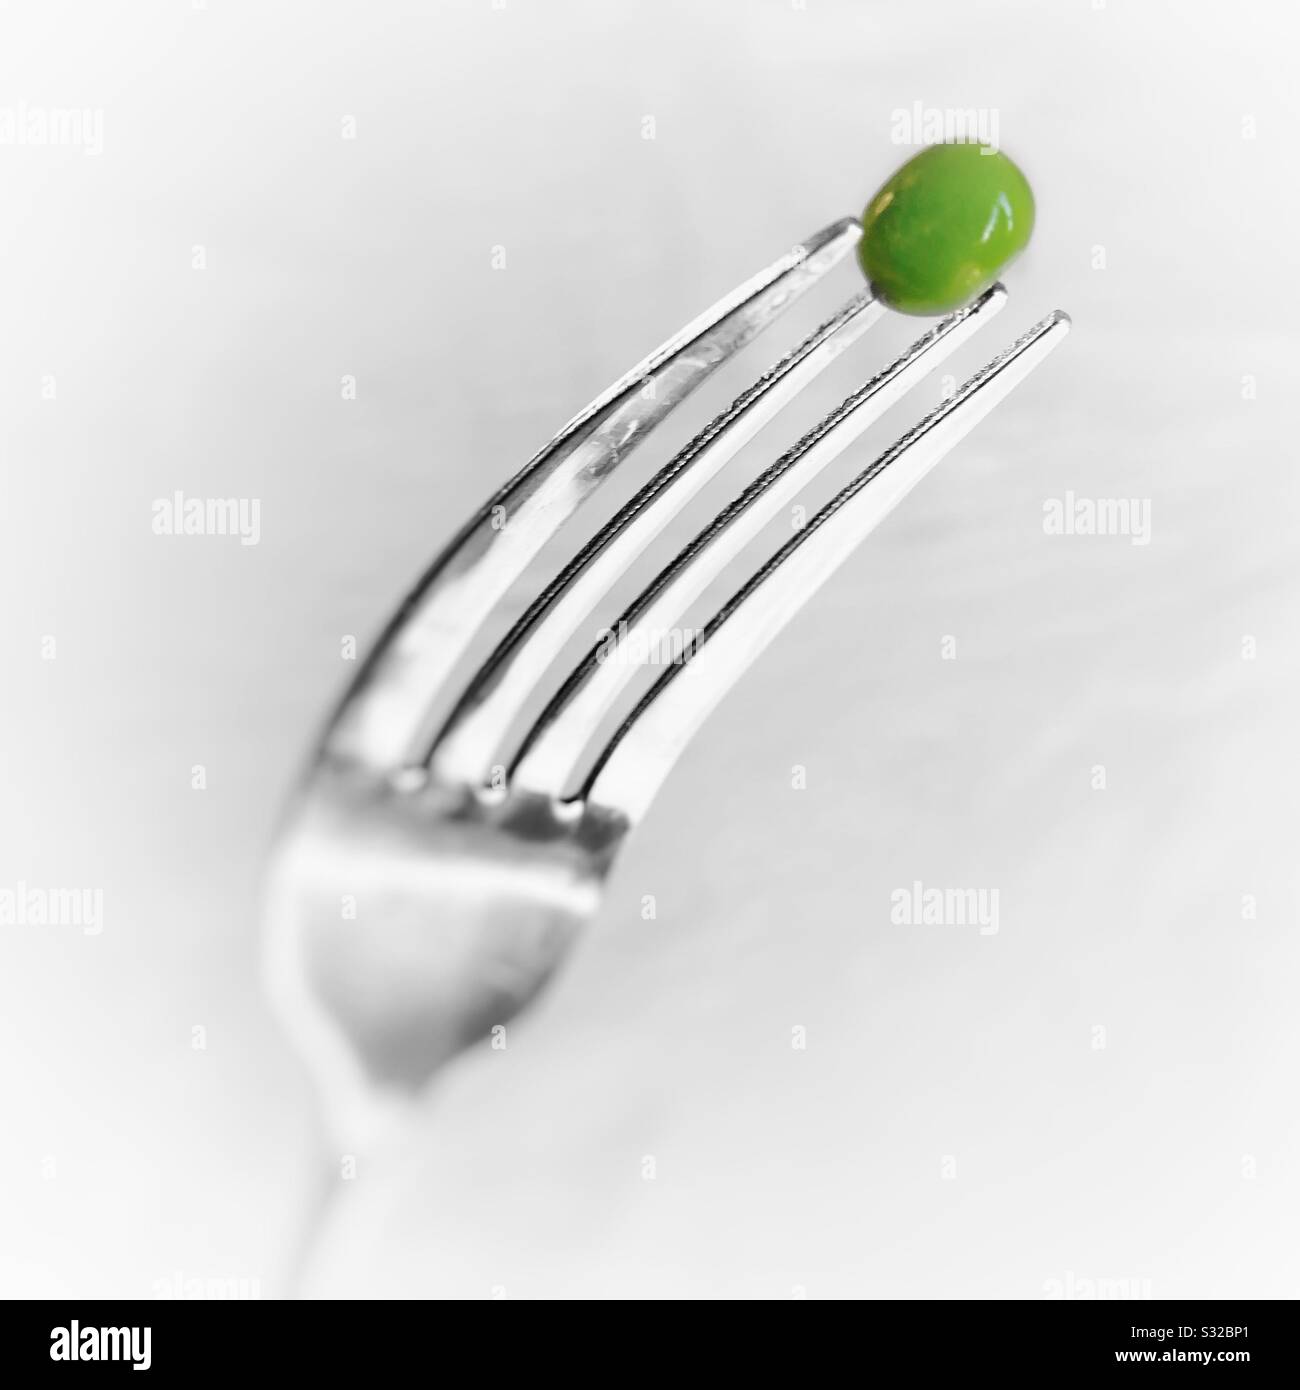 Still life: Closeup of steel dinner fork with a single green pea on light background. Stock Photo